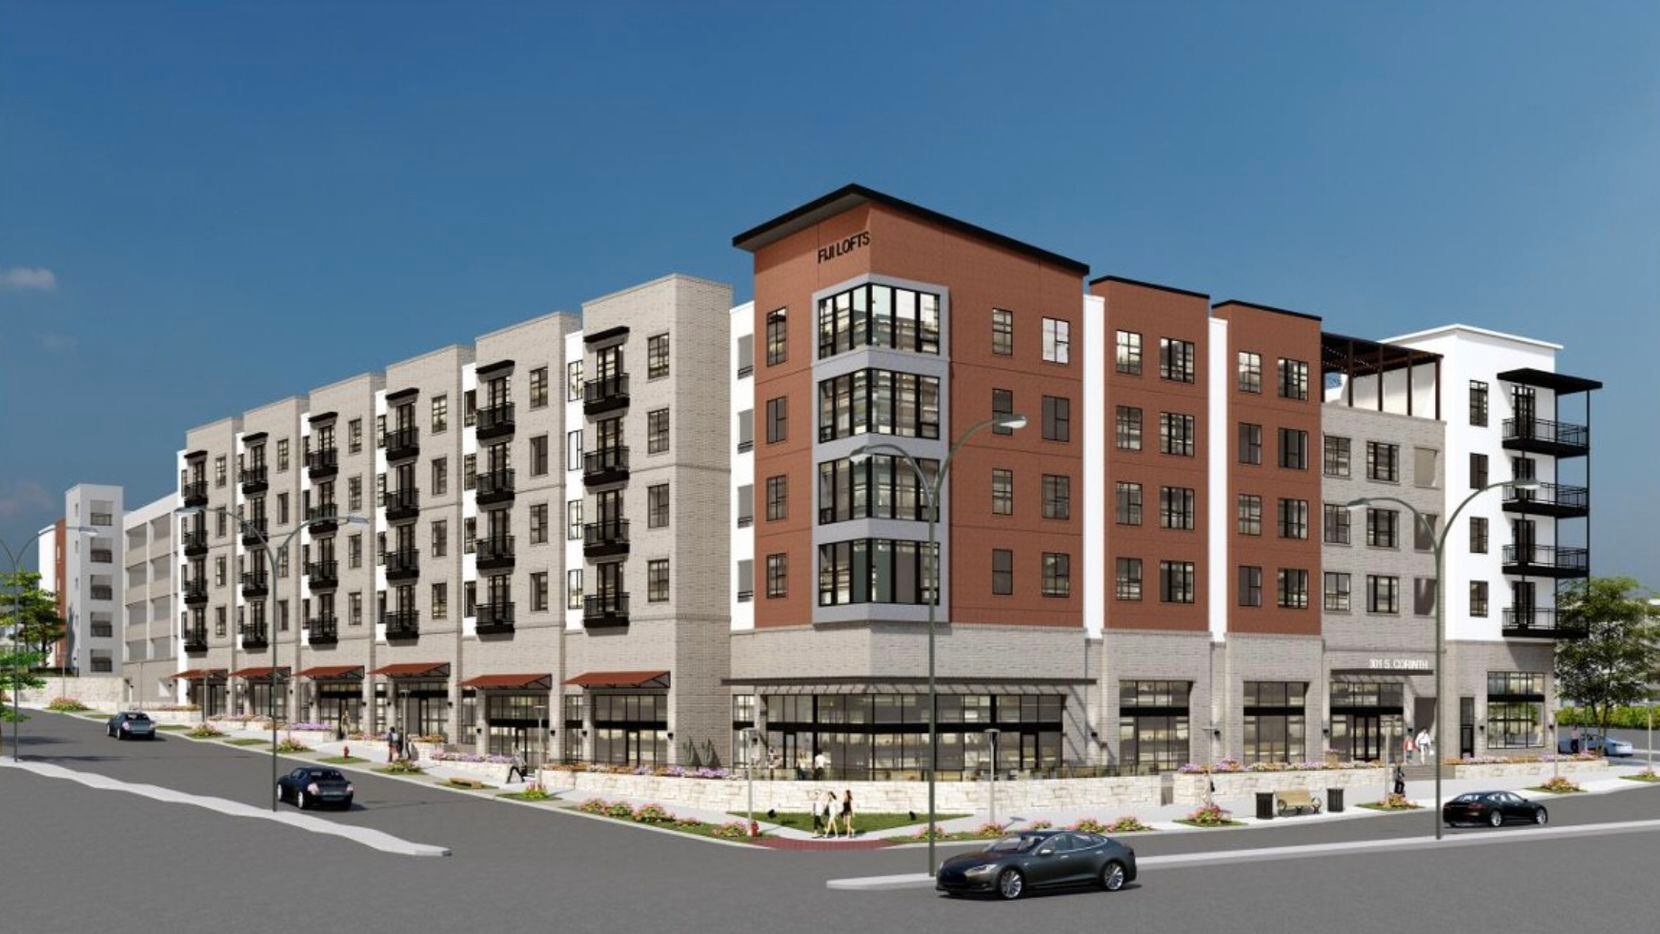 The Fiji Lofts apartments are planned at 301 S. Corinth, east of Interstate 35E.